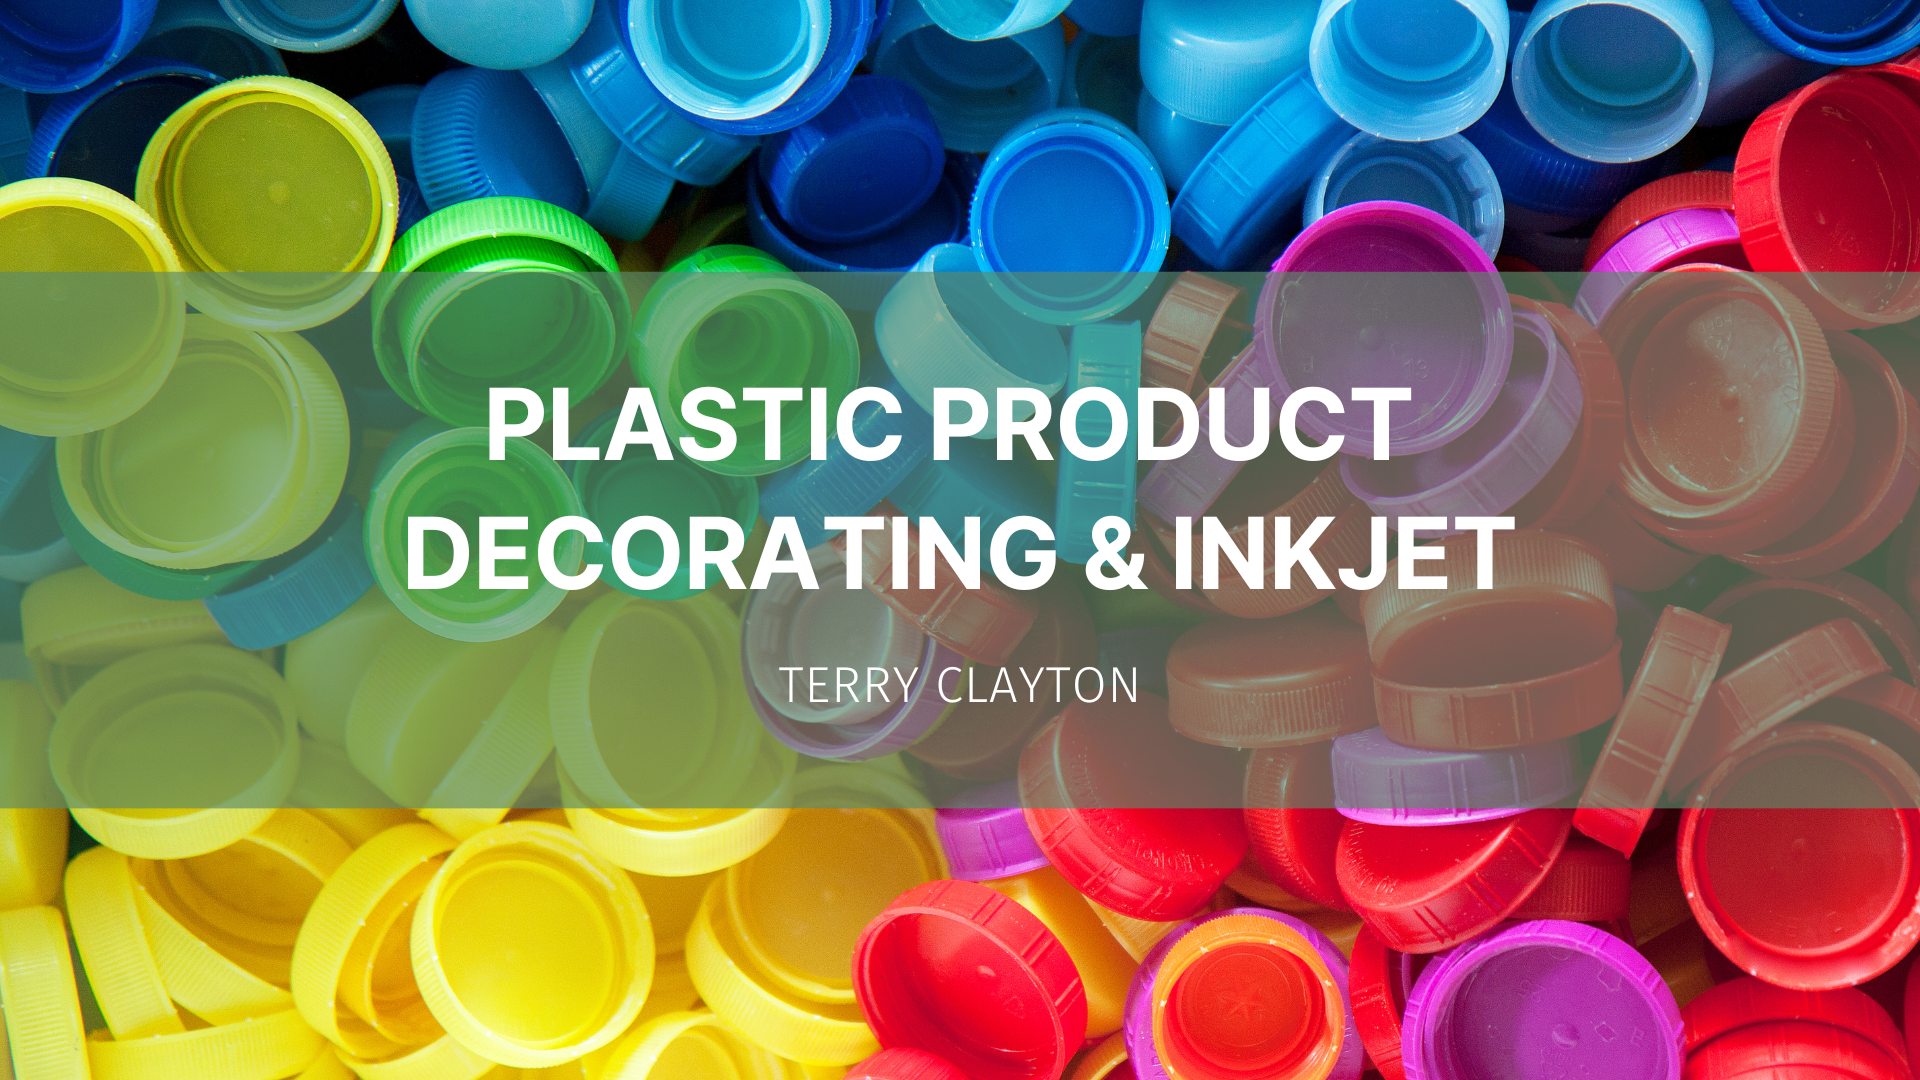 Featured image for “Plastic Product Decorating & Inkjet”